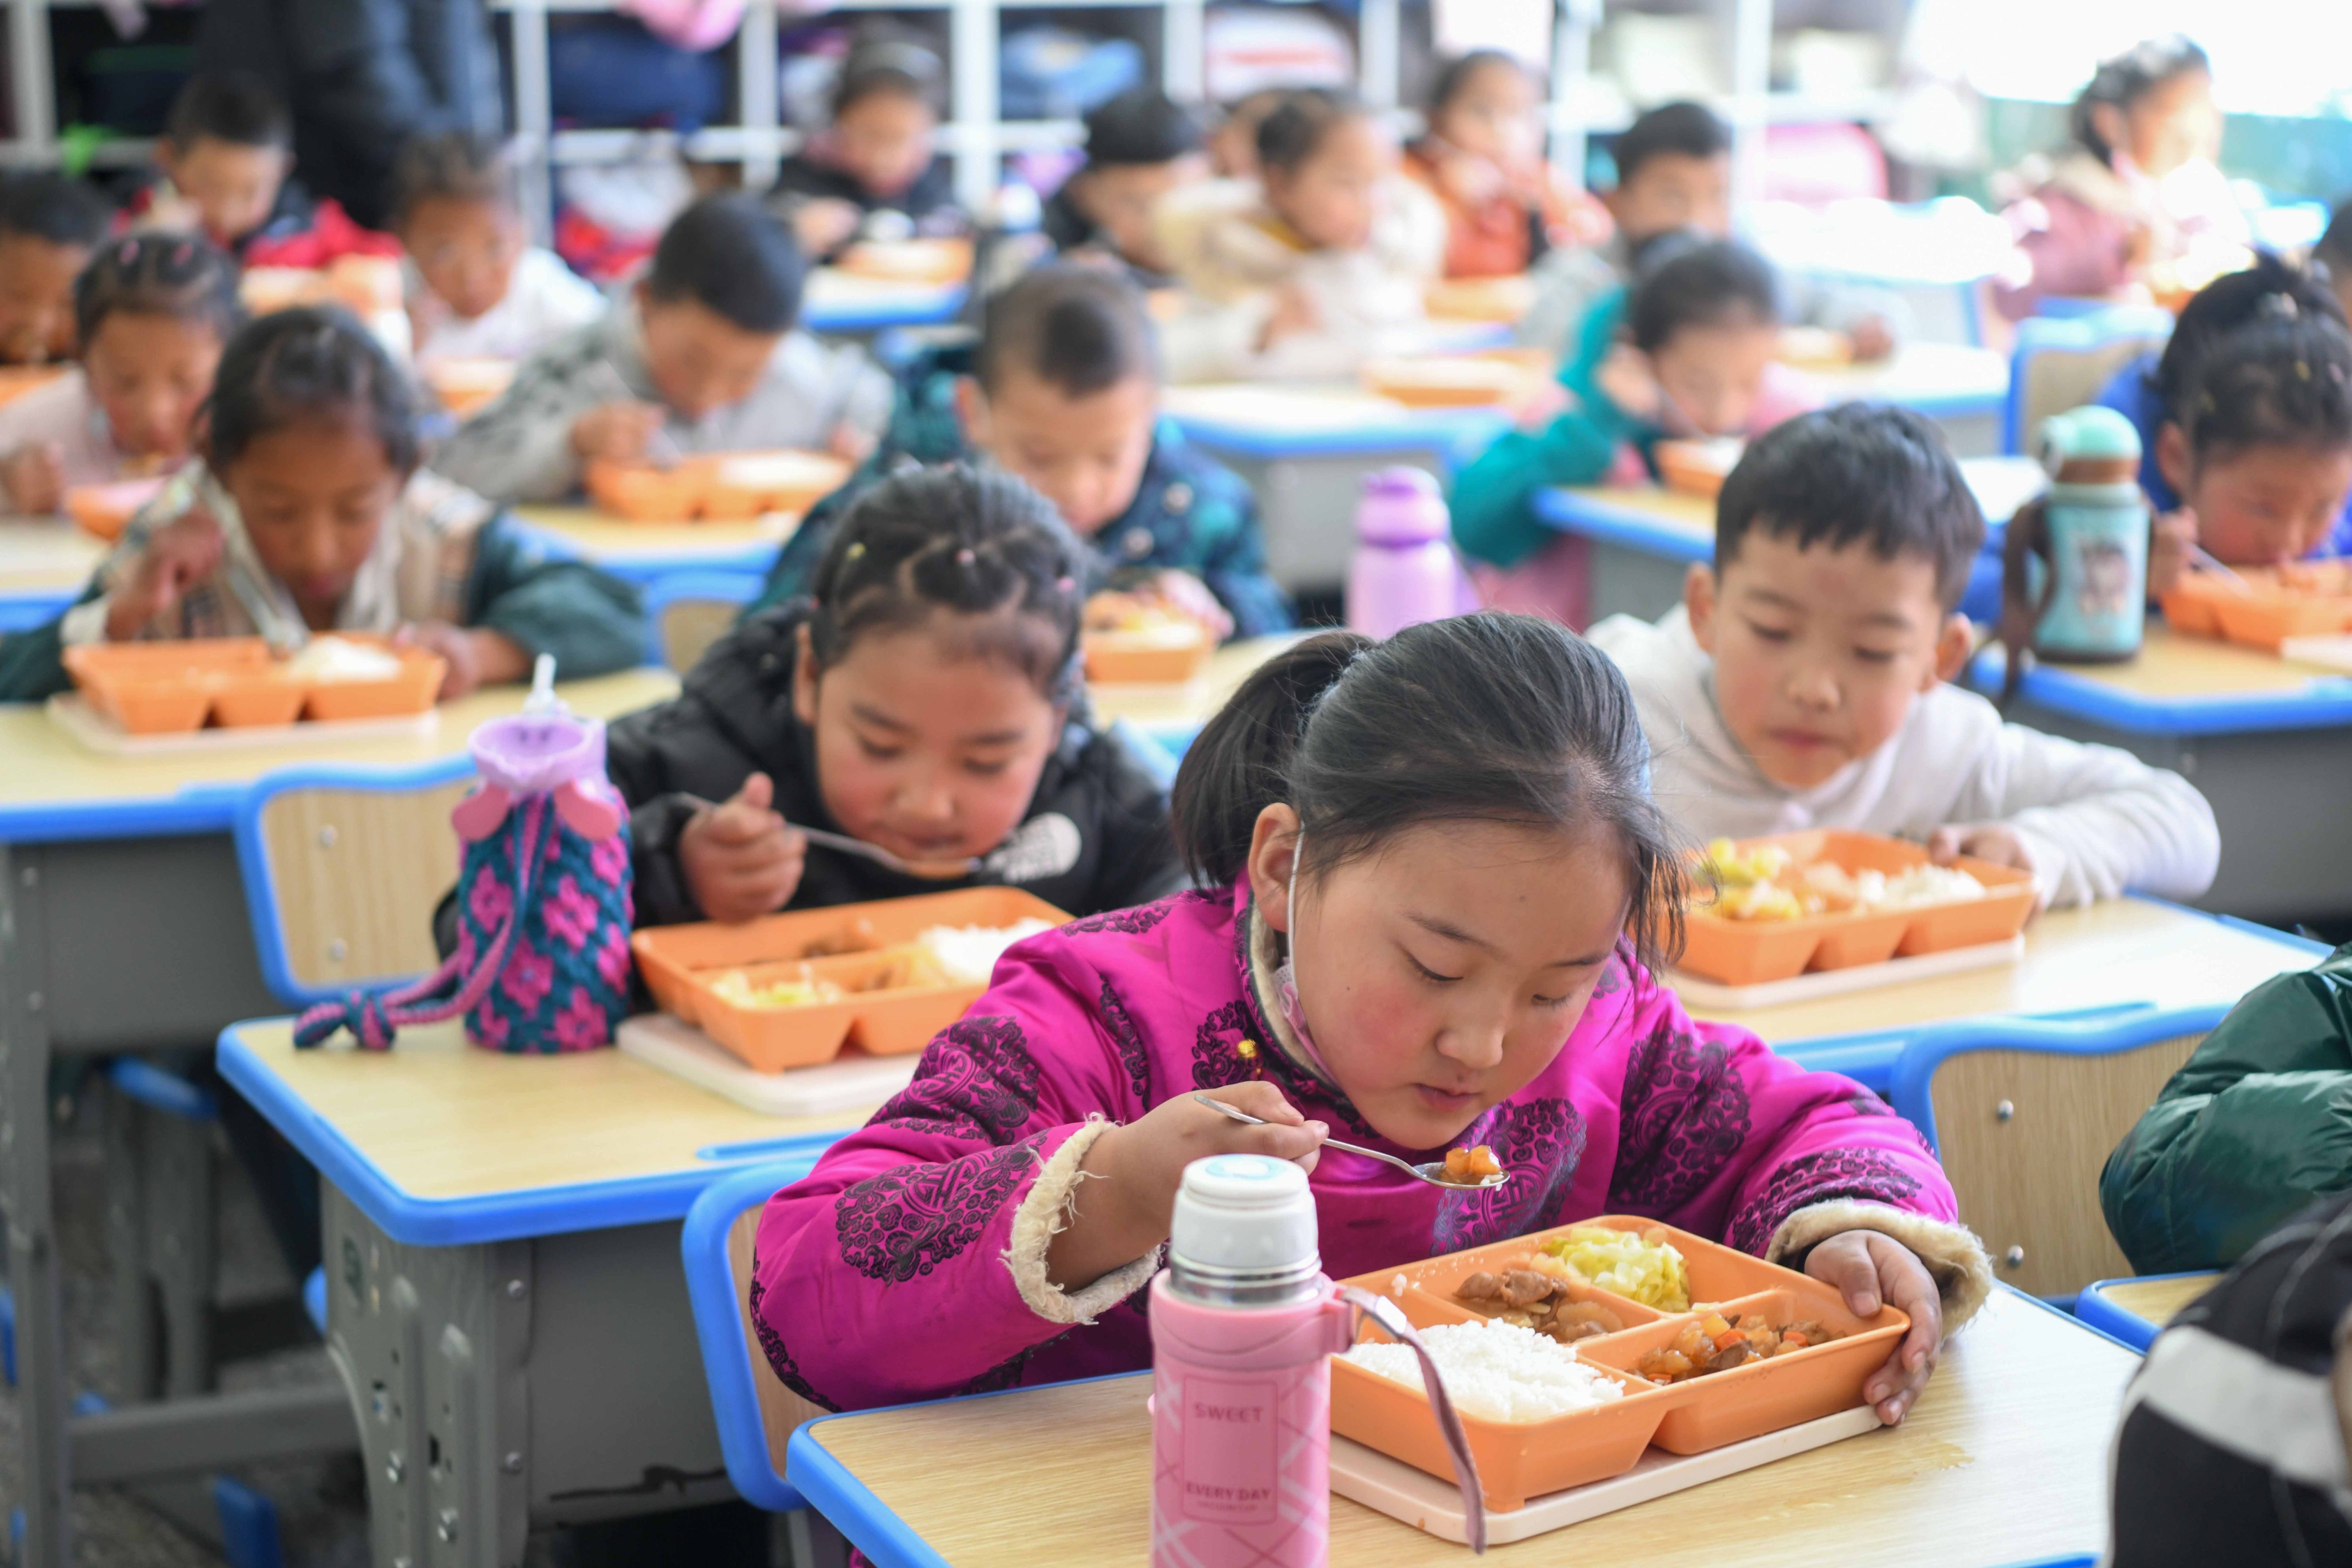 Students eat lunch at a Chinese primary school in Lhasa, Tibet, March 11, 2022. (Gongga Laisong—China News Service/Getty Images)